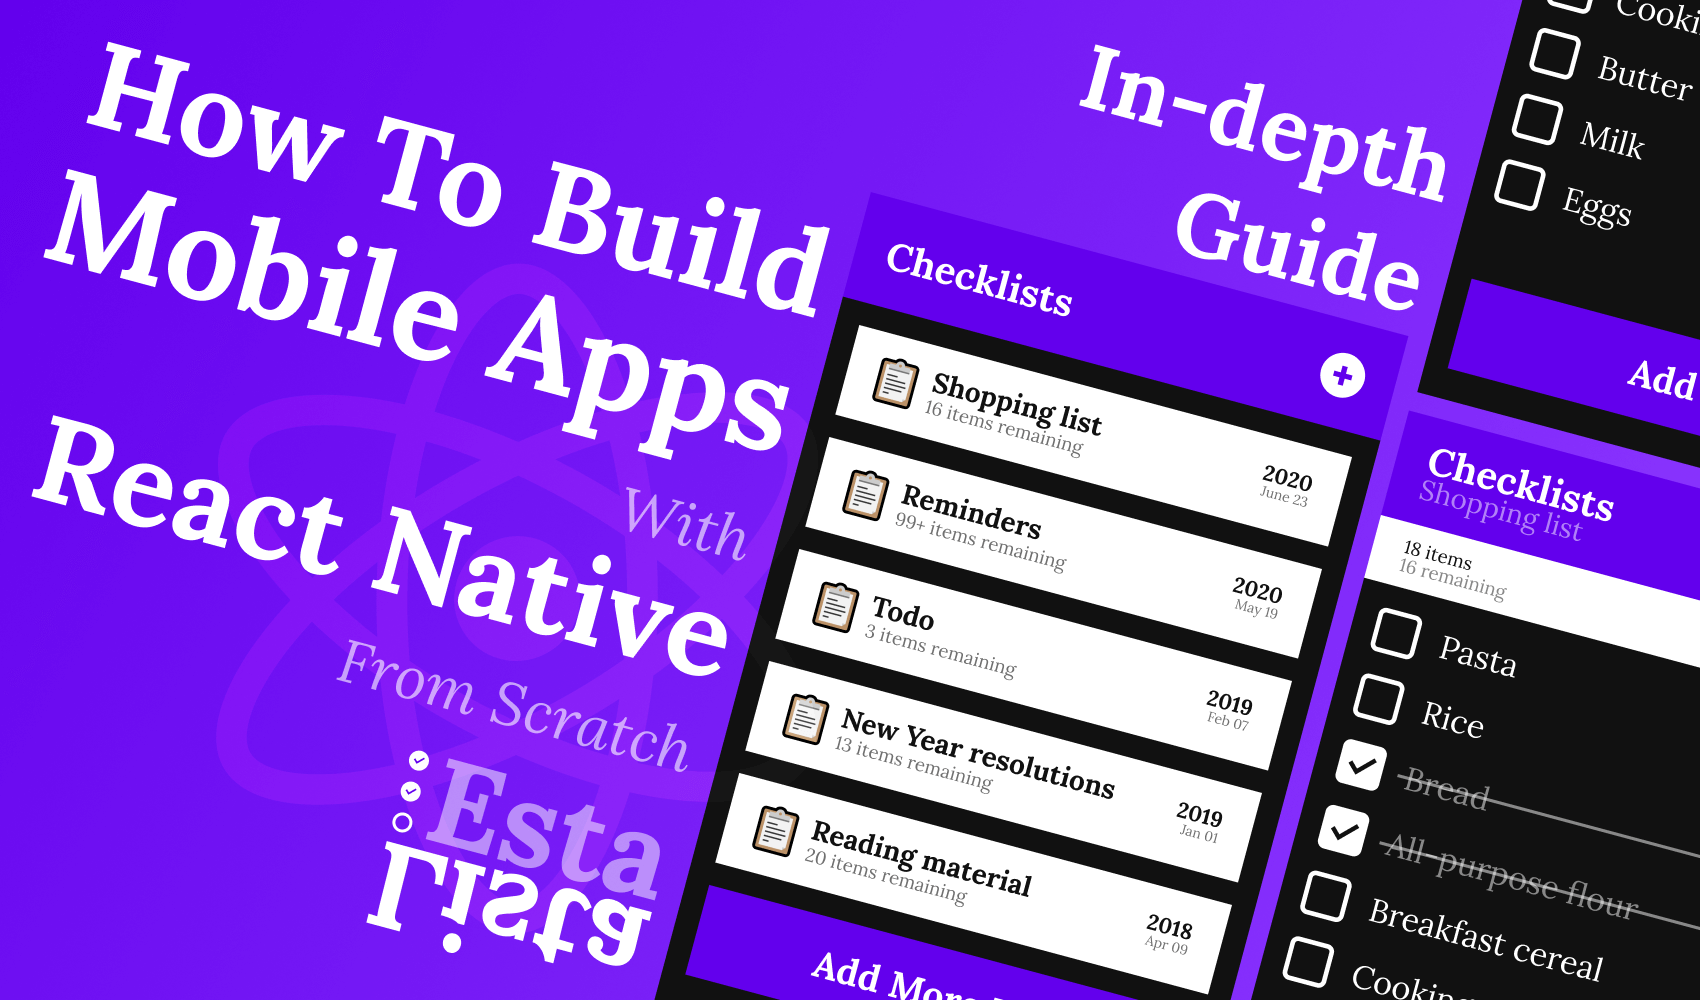 How to Build Mobile Apps With React Native